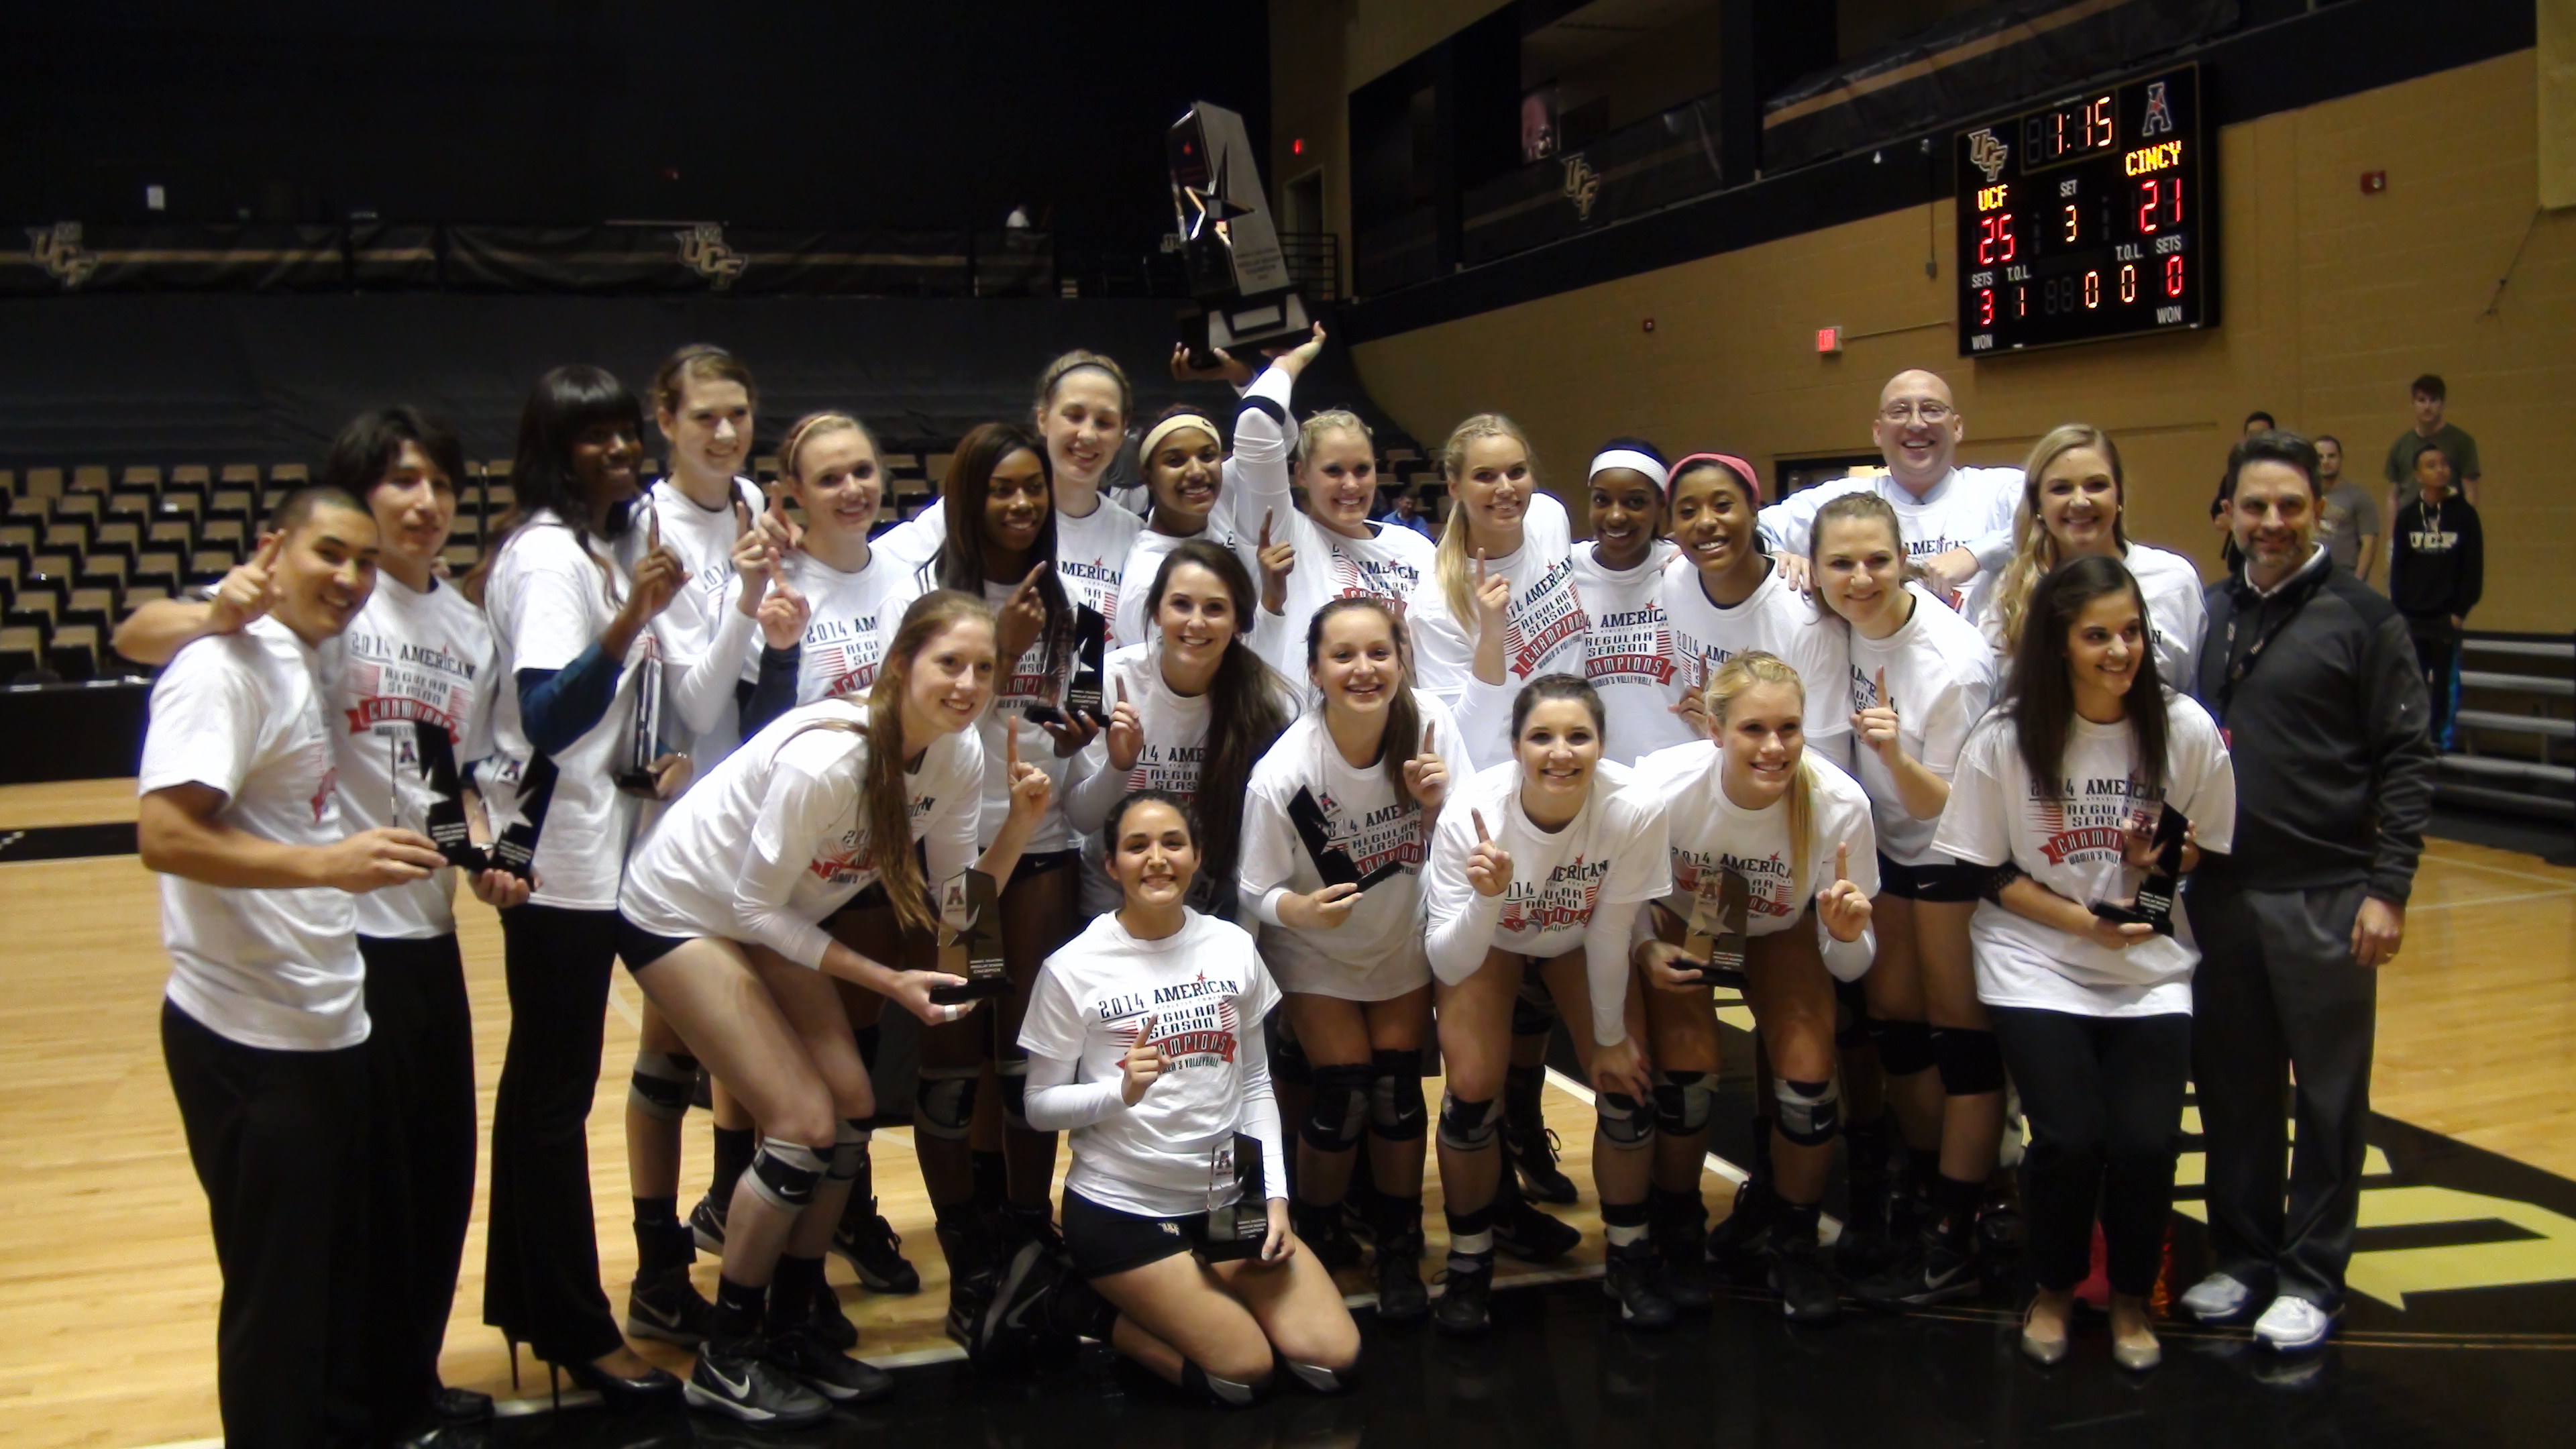 The UCF Volleyball team won The American in 2014.  Two players remain from this team in 2017. (Photo: Jeff Sharon)